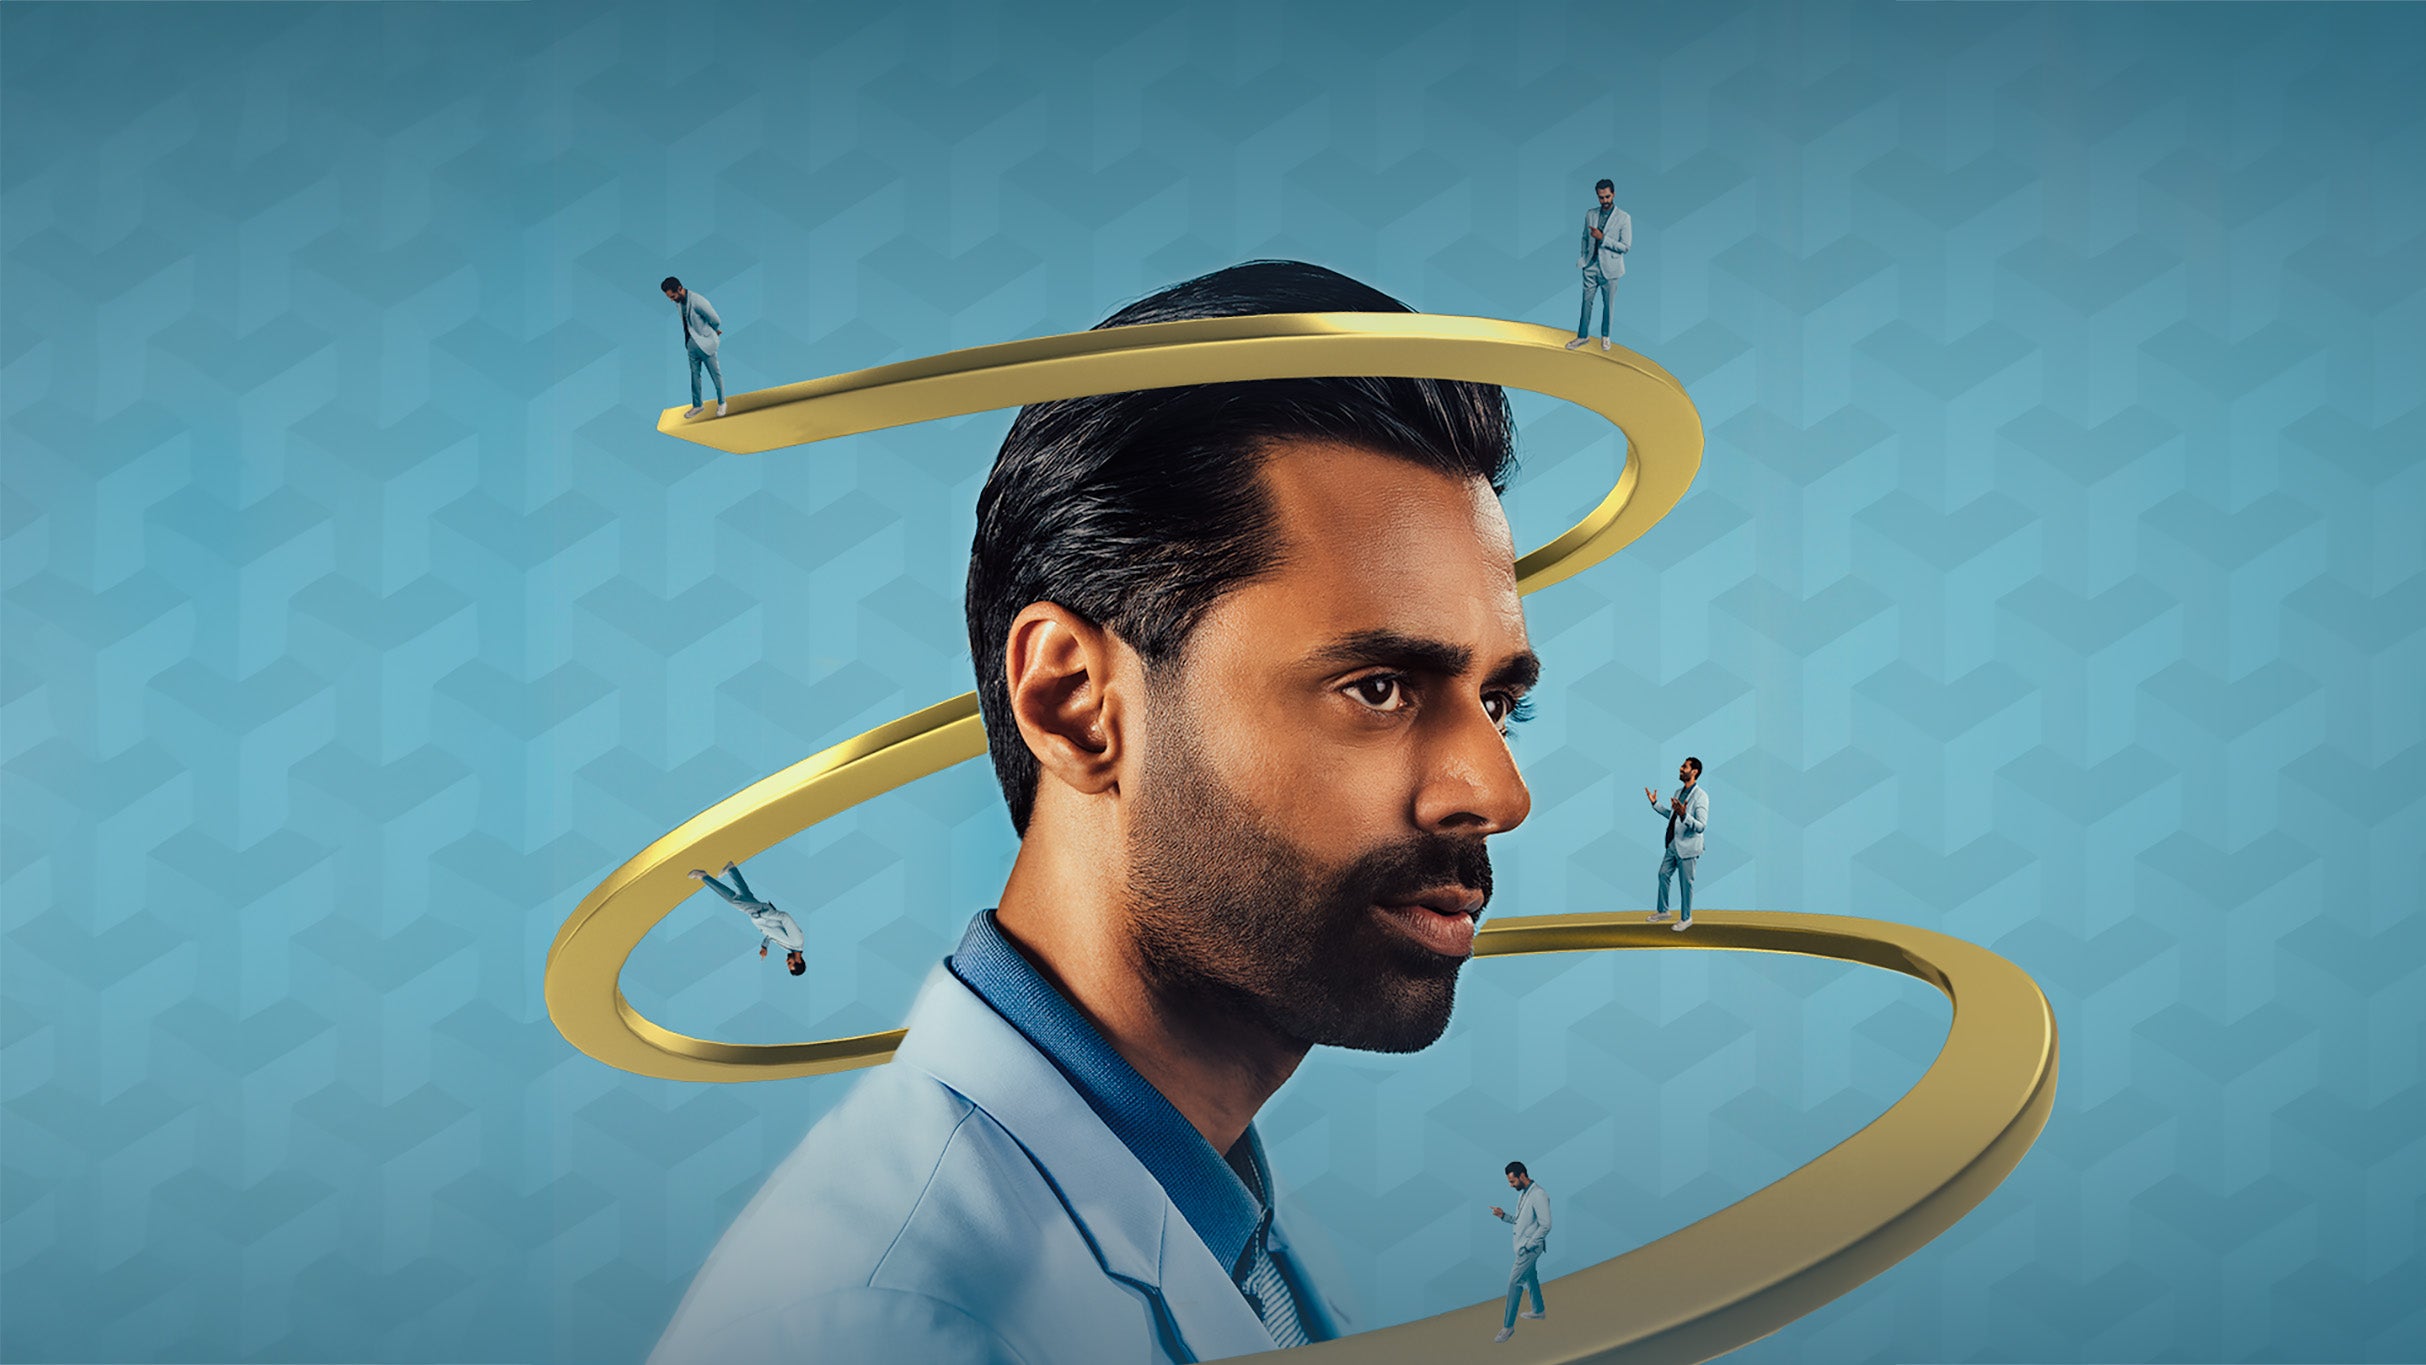 Hasan Minhaj: Off With His Head Tour free presale code for show tickets in Nashville, TN (TN Perf Arts Ctr Andrew Jackson Hall)